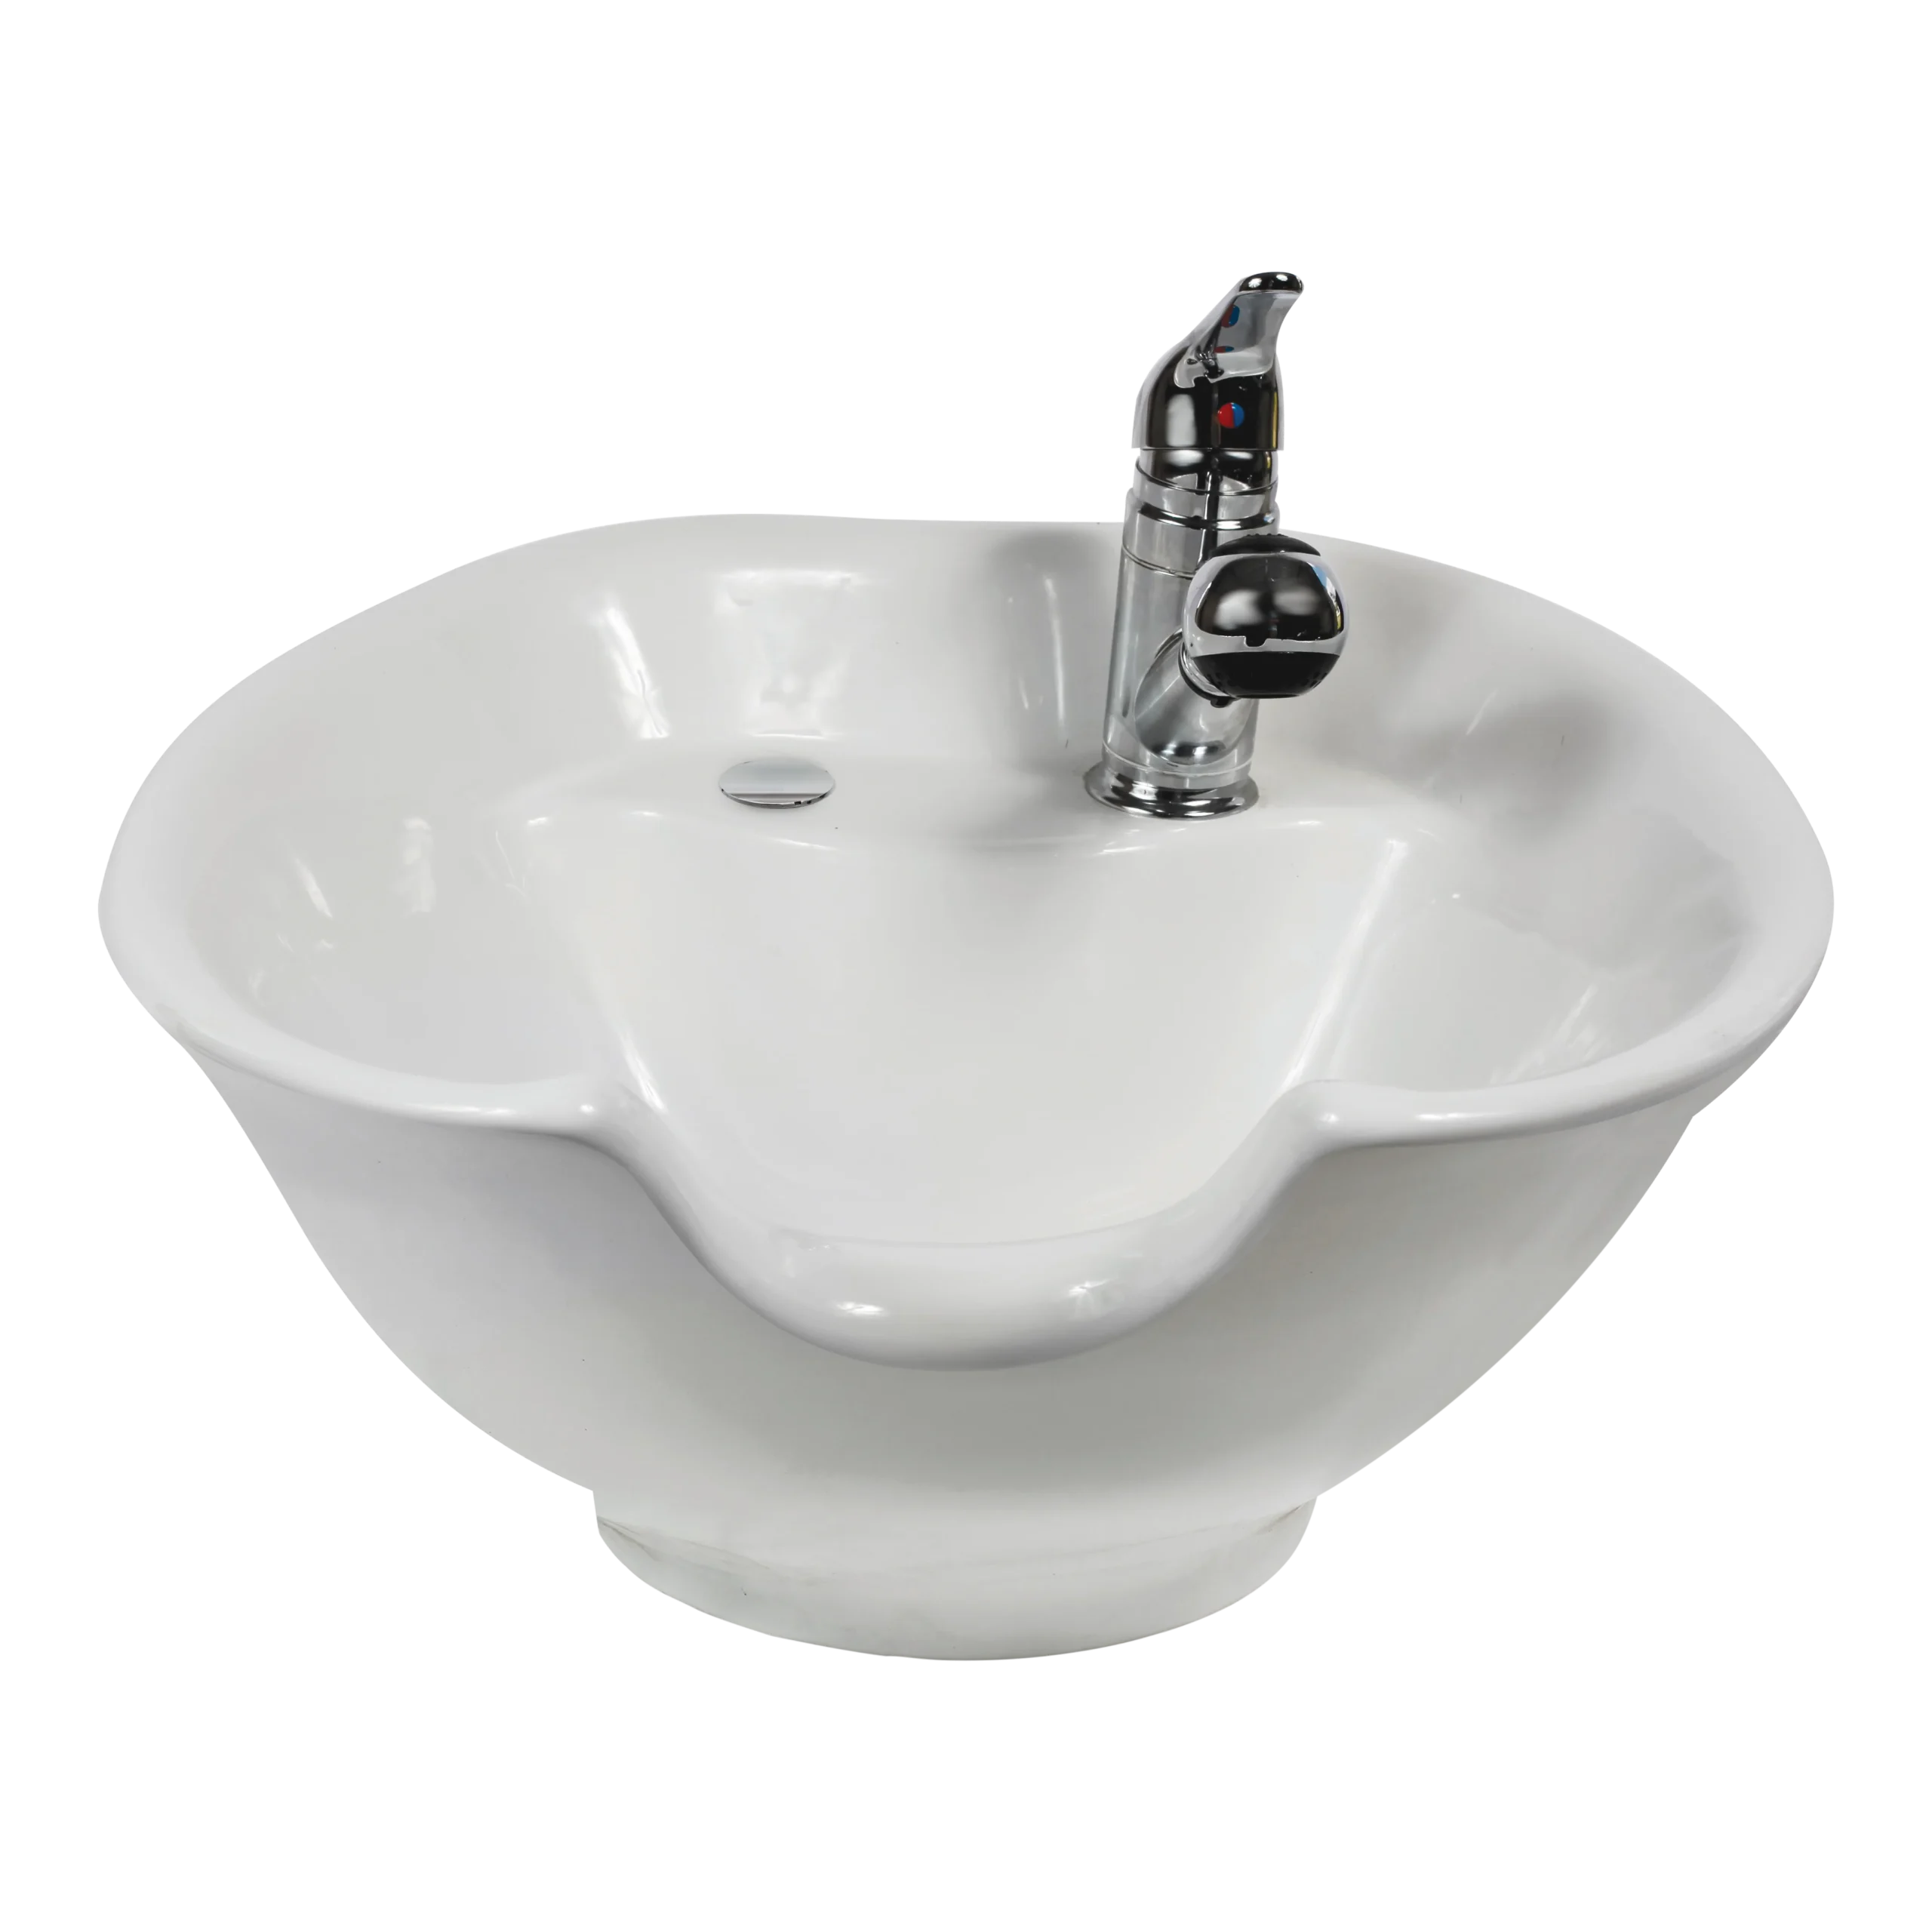 Kaemark A white 933 Tilting Shampoo Bowl with a faucet on it.